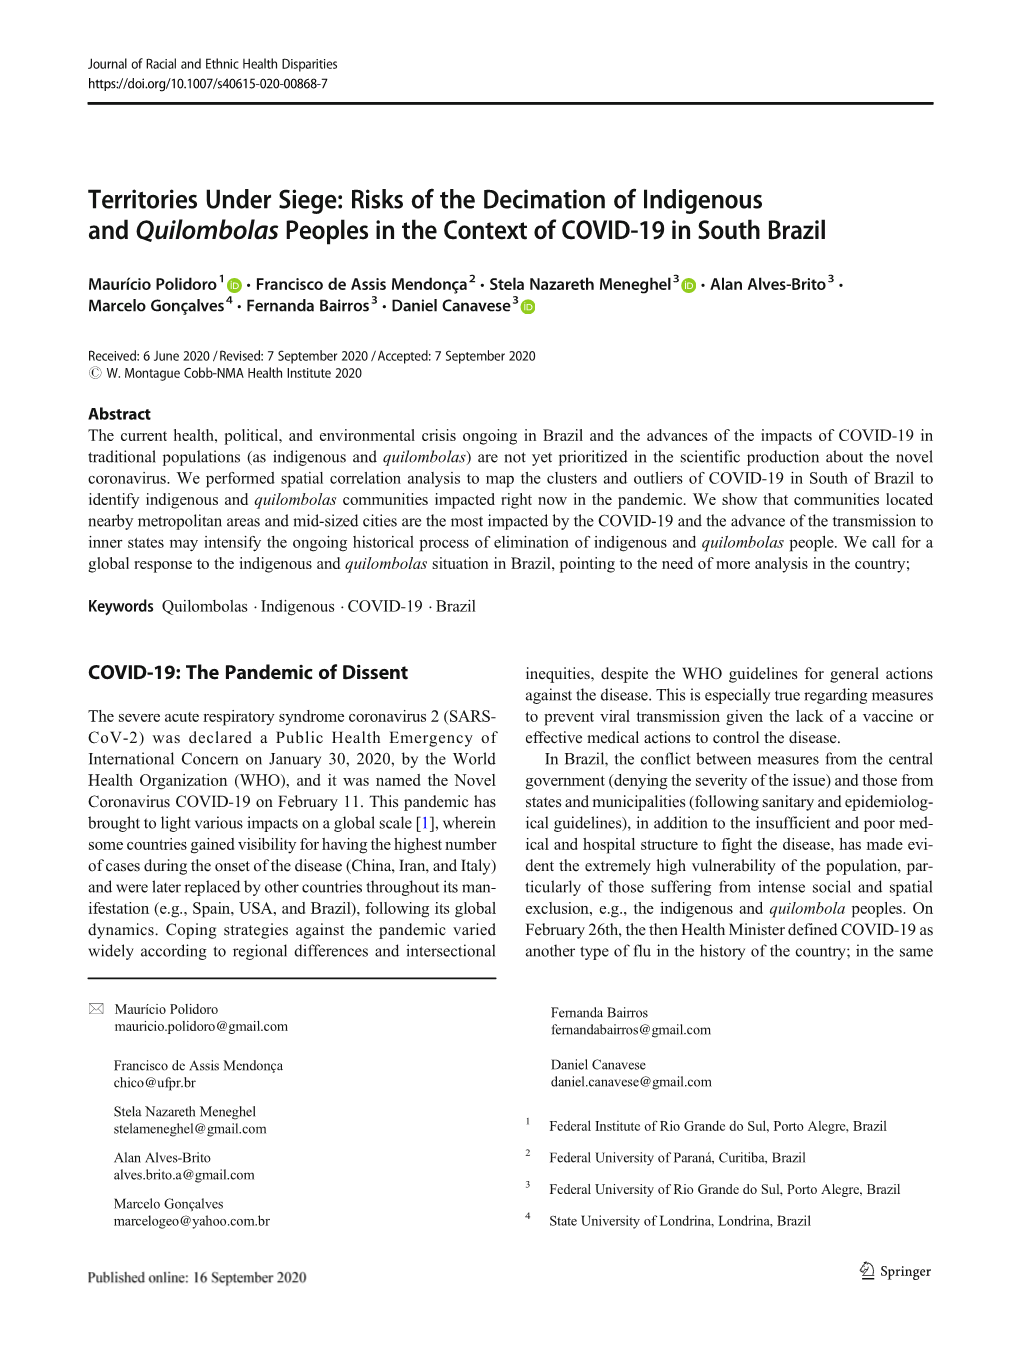 Territories Under Siege: Risks of the Decimation of Indigenous and Quilombolas Peoples in the Context of COVID-19 in South Brazil